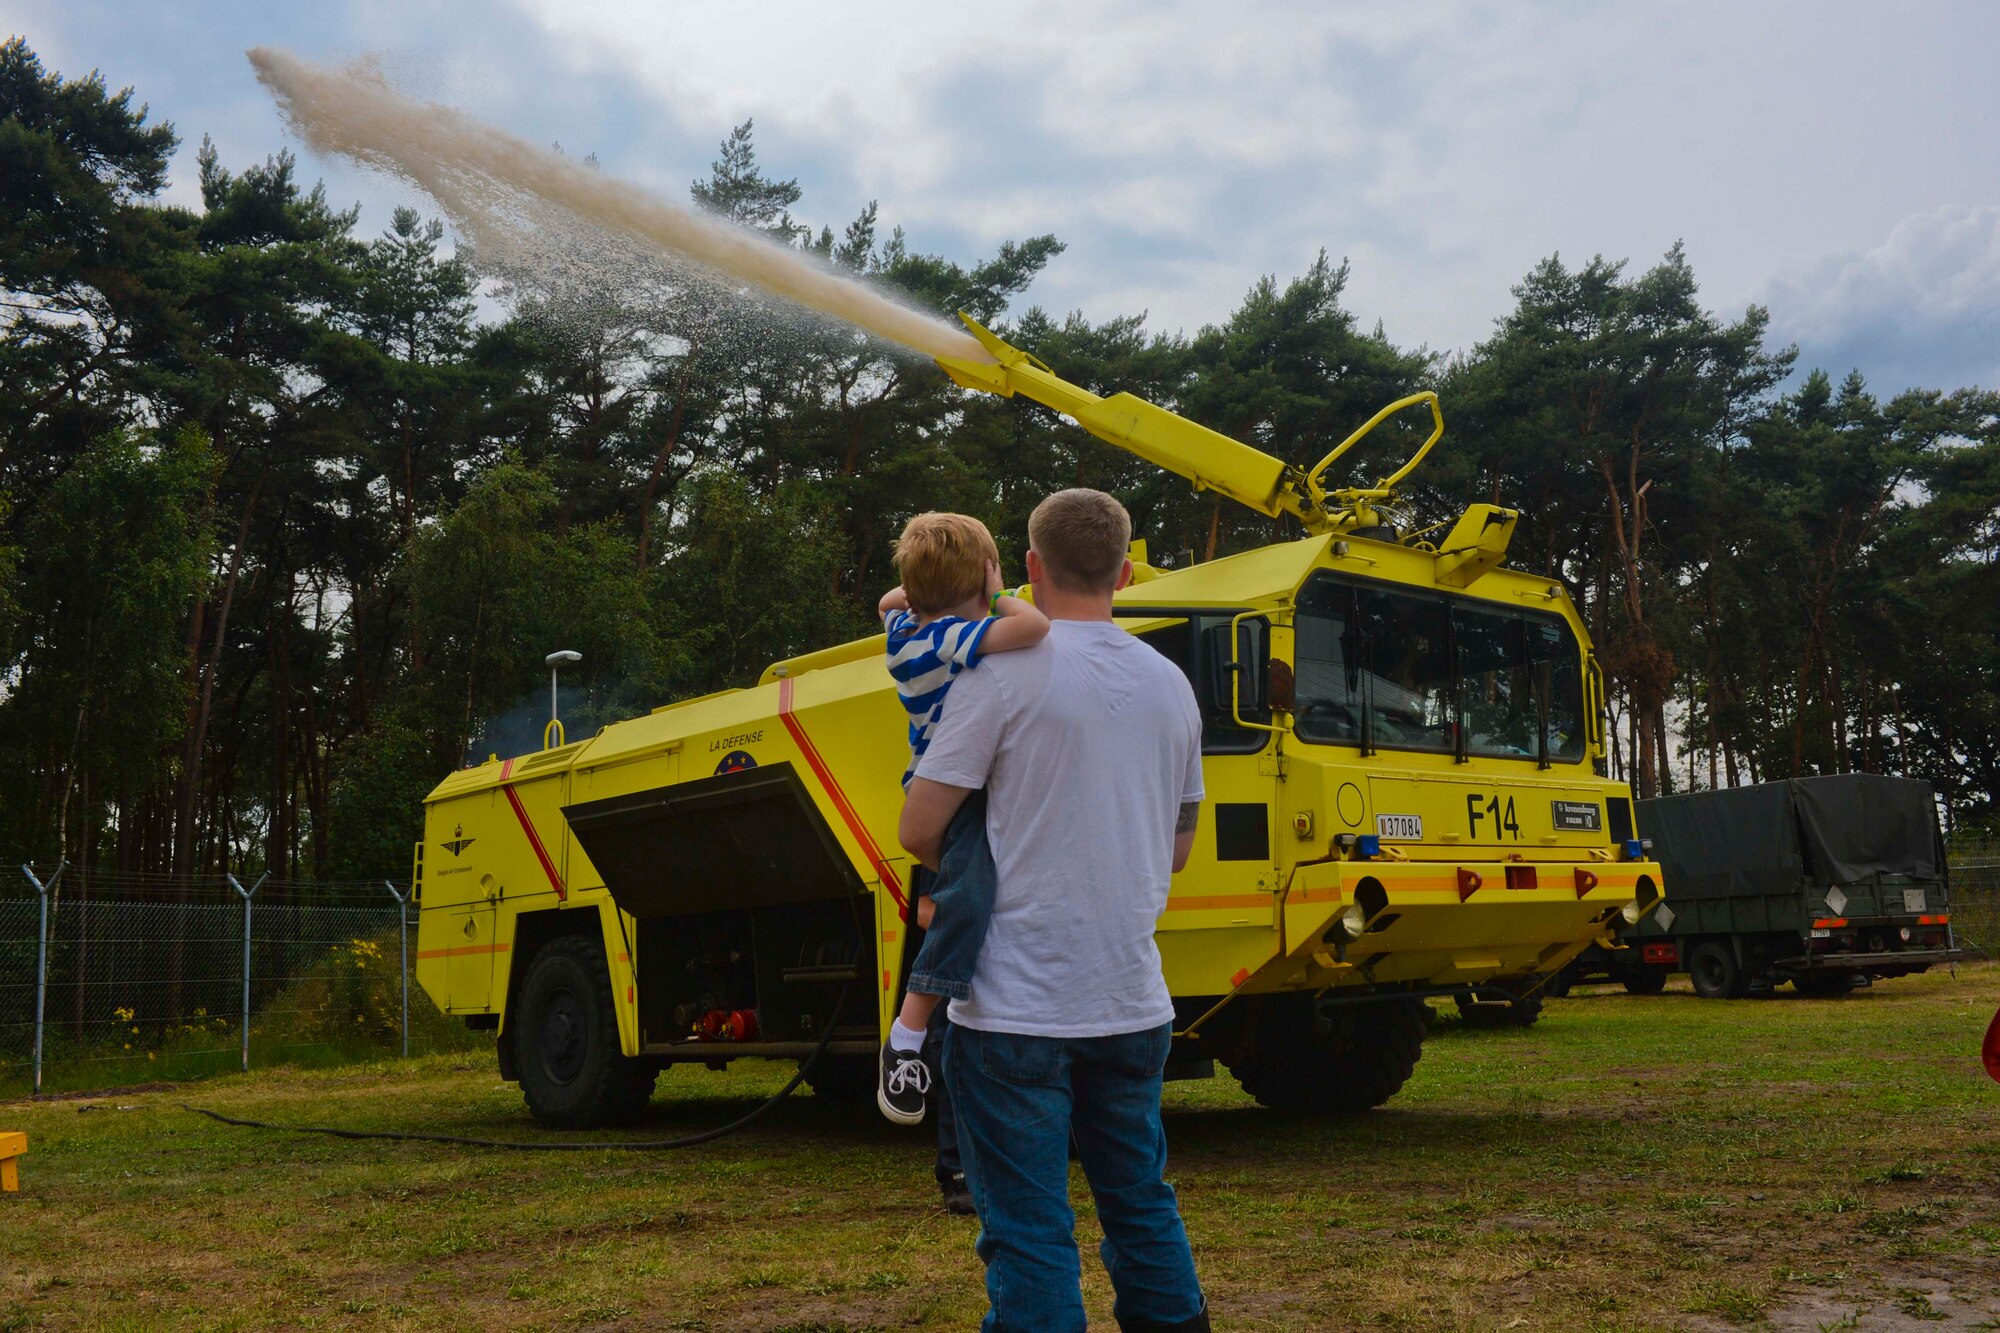 U.S. Air Force Staff Sgt. Evan McLelland, a 701st Munitions Support Squadron NCO and Boynton Beach, Fla., native, holds his son, Aiden, 5, as they watch a Belgian Air Component fire truck shoot its water cannon during the Belgian-American Friendship Day at Kleine Brogel Air Base, Belgium, June 27, 2014.  The Belgian Armed Forces maintain the installation which houses the Airmen of the 701st MUNSS. (U.S. Air Force photo by Staff Sgt. Joe W. McFadden/Released)